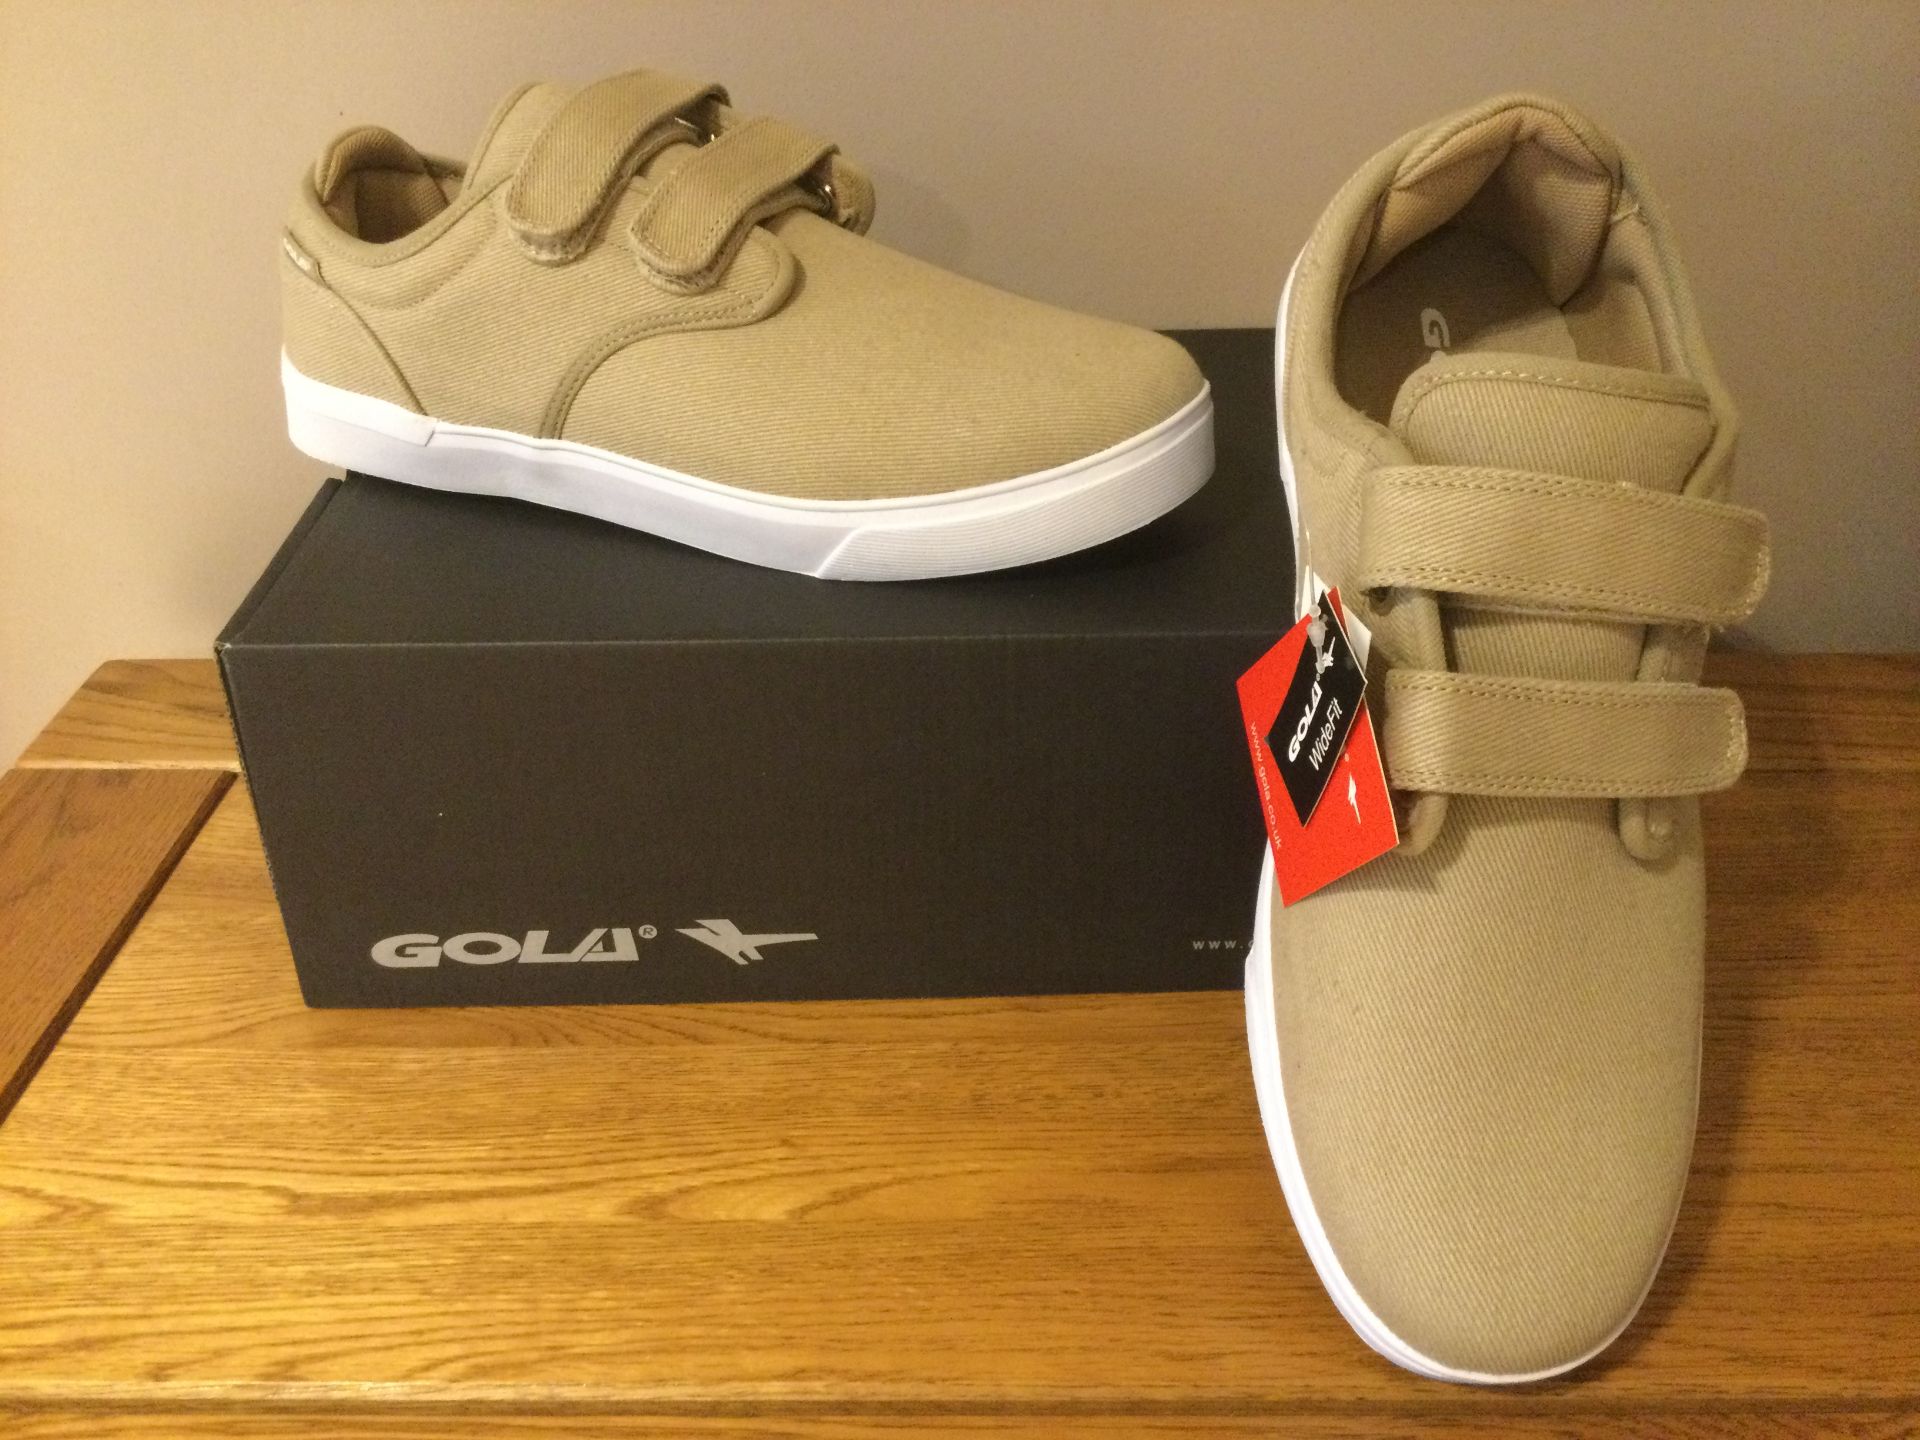 Gola “Panama” QF Men's Wide Fit Trainers, Size 10, Taupe/White - New RRP £36.00 - Image 2 of 5